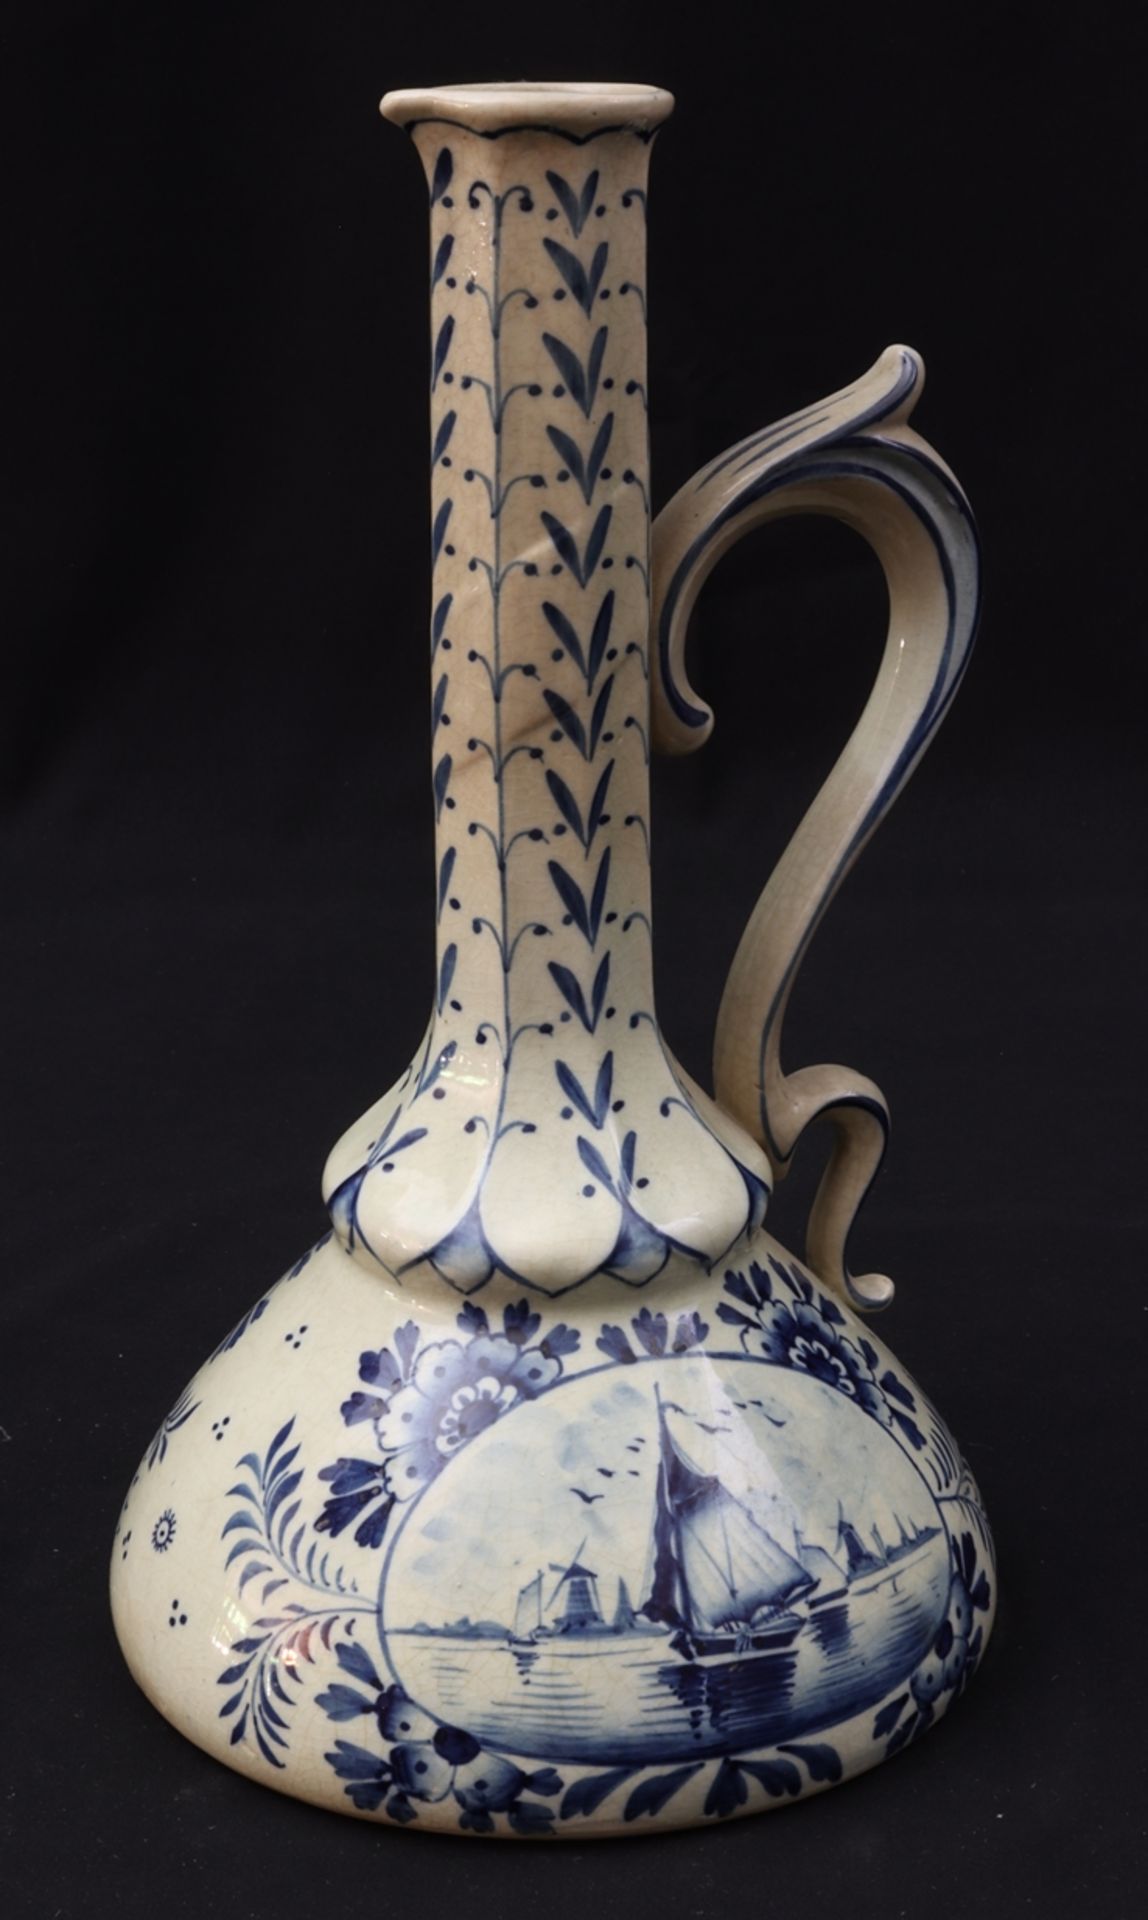 Delft narrow-necked jug, mid to late 19th c., Holland